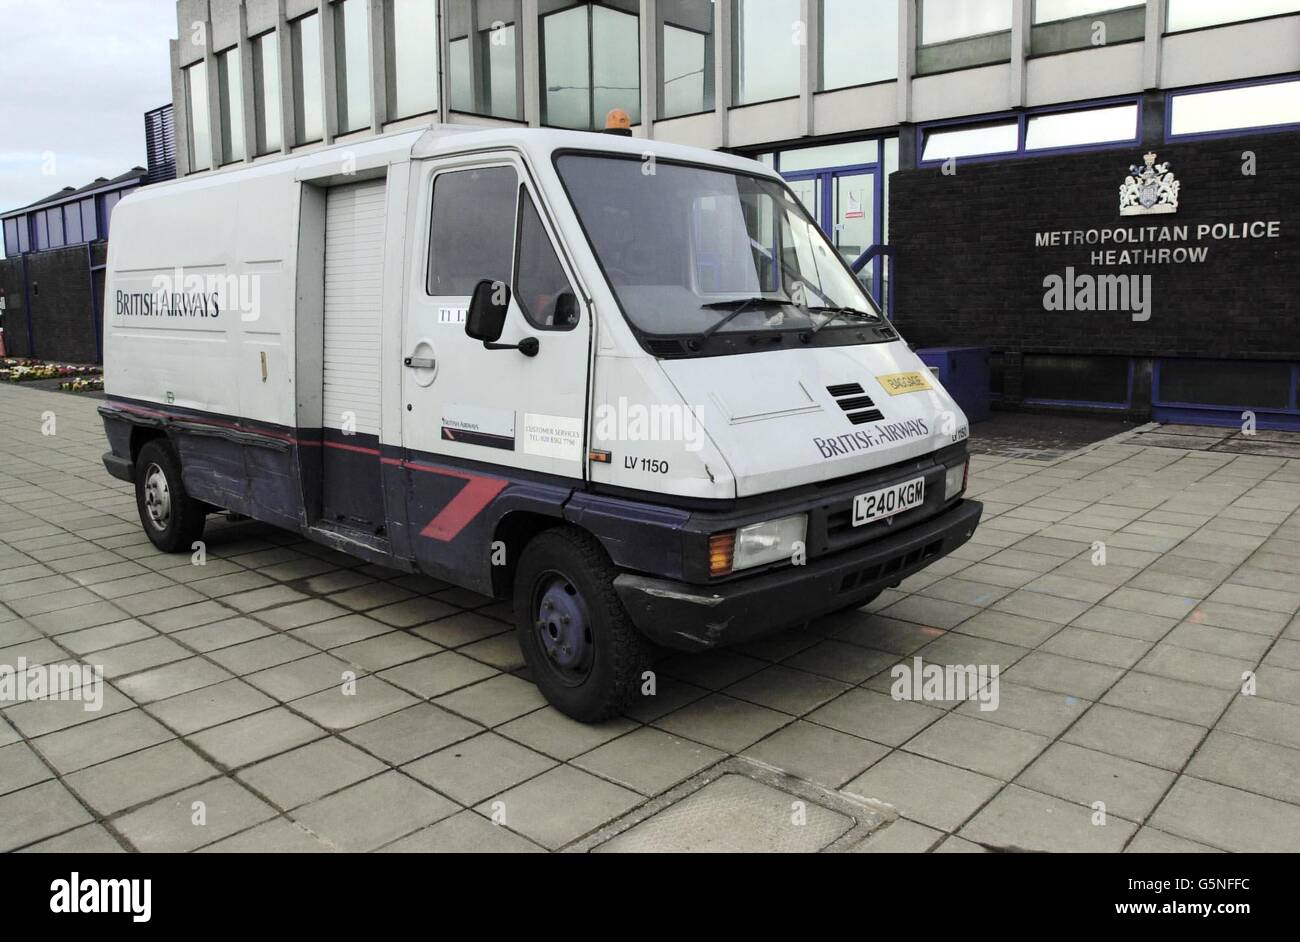 A British Airways Baggage van similar to the one used by robbers who attacked a BA security van in a secure airside cargo loading area near Heathrow Airport's Terminal 4, and who escaped with 4.6 million, outside Heathrow Police station. * The vehicle was subsequently found abandoned and burning two miles away in a residential area in Feltham, west London. Government ministers responsible for aviation security have ordered a report on how thieves managed to gain access to the airport's restricted zone during a period of heightened security in the wake of events on September 11. Stock Photo